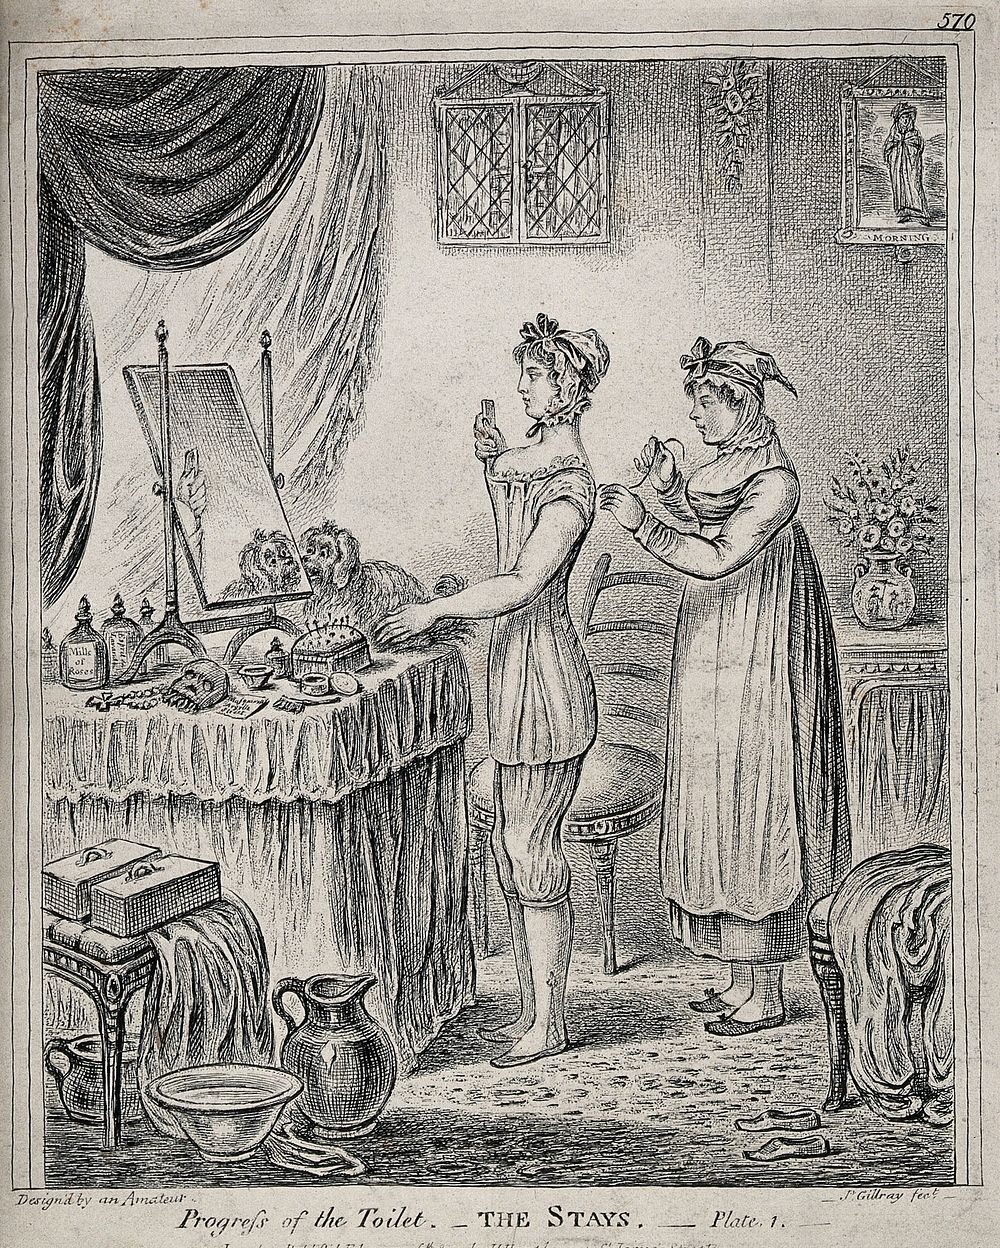 A woman standing at a dressing table while a maidservant laces her stays. Etching by J. Gillray, 1810, after himself.